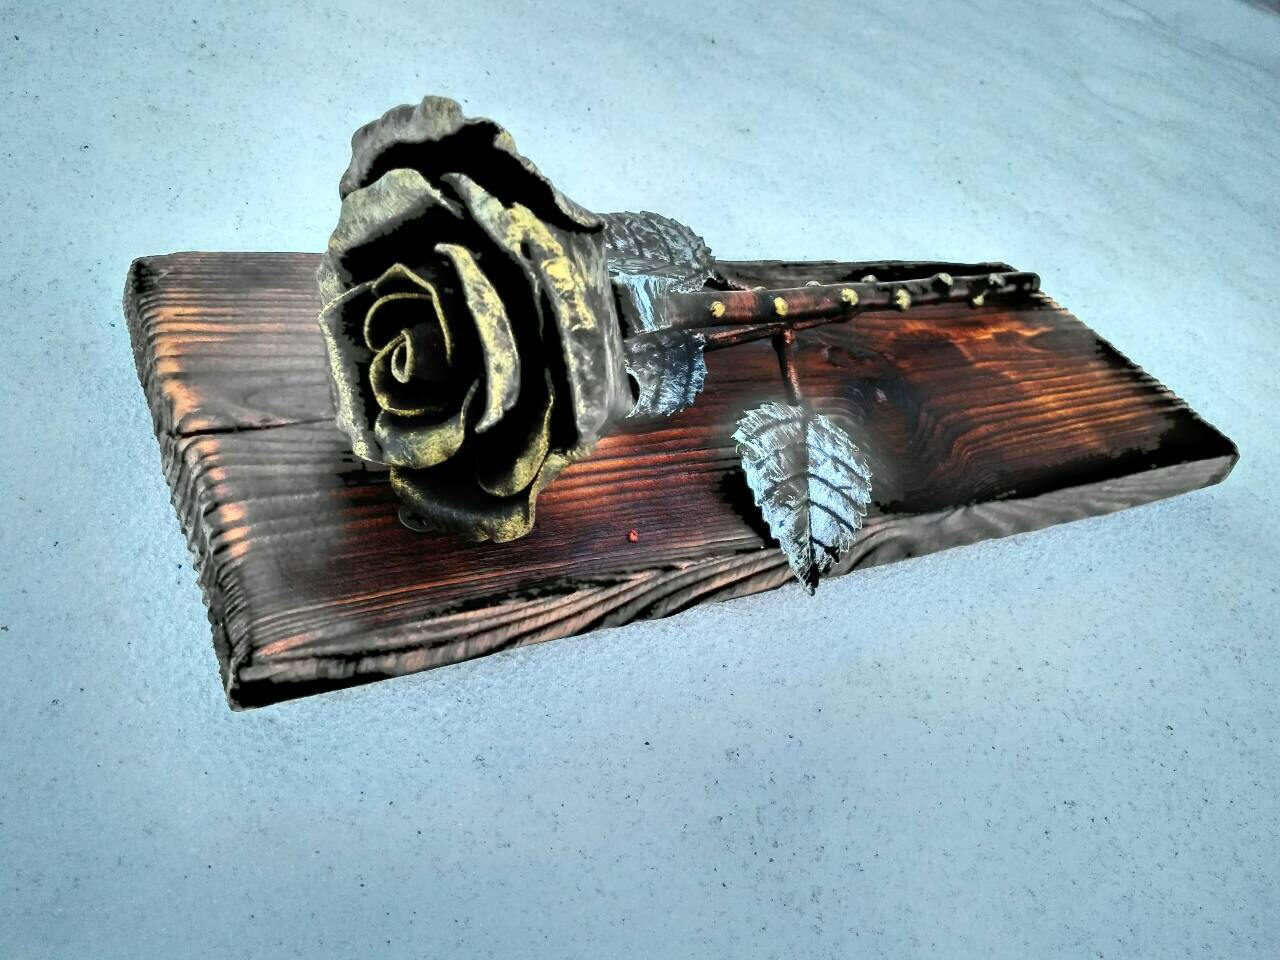 Iron rose, metal rose, engraved gift, personalized iron gift, forging art, gift for wife spouse woman, wedding gift, 6th anniversary gift